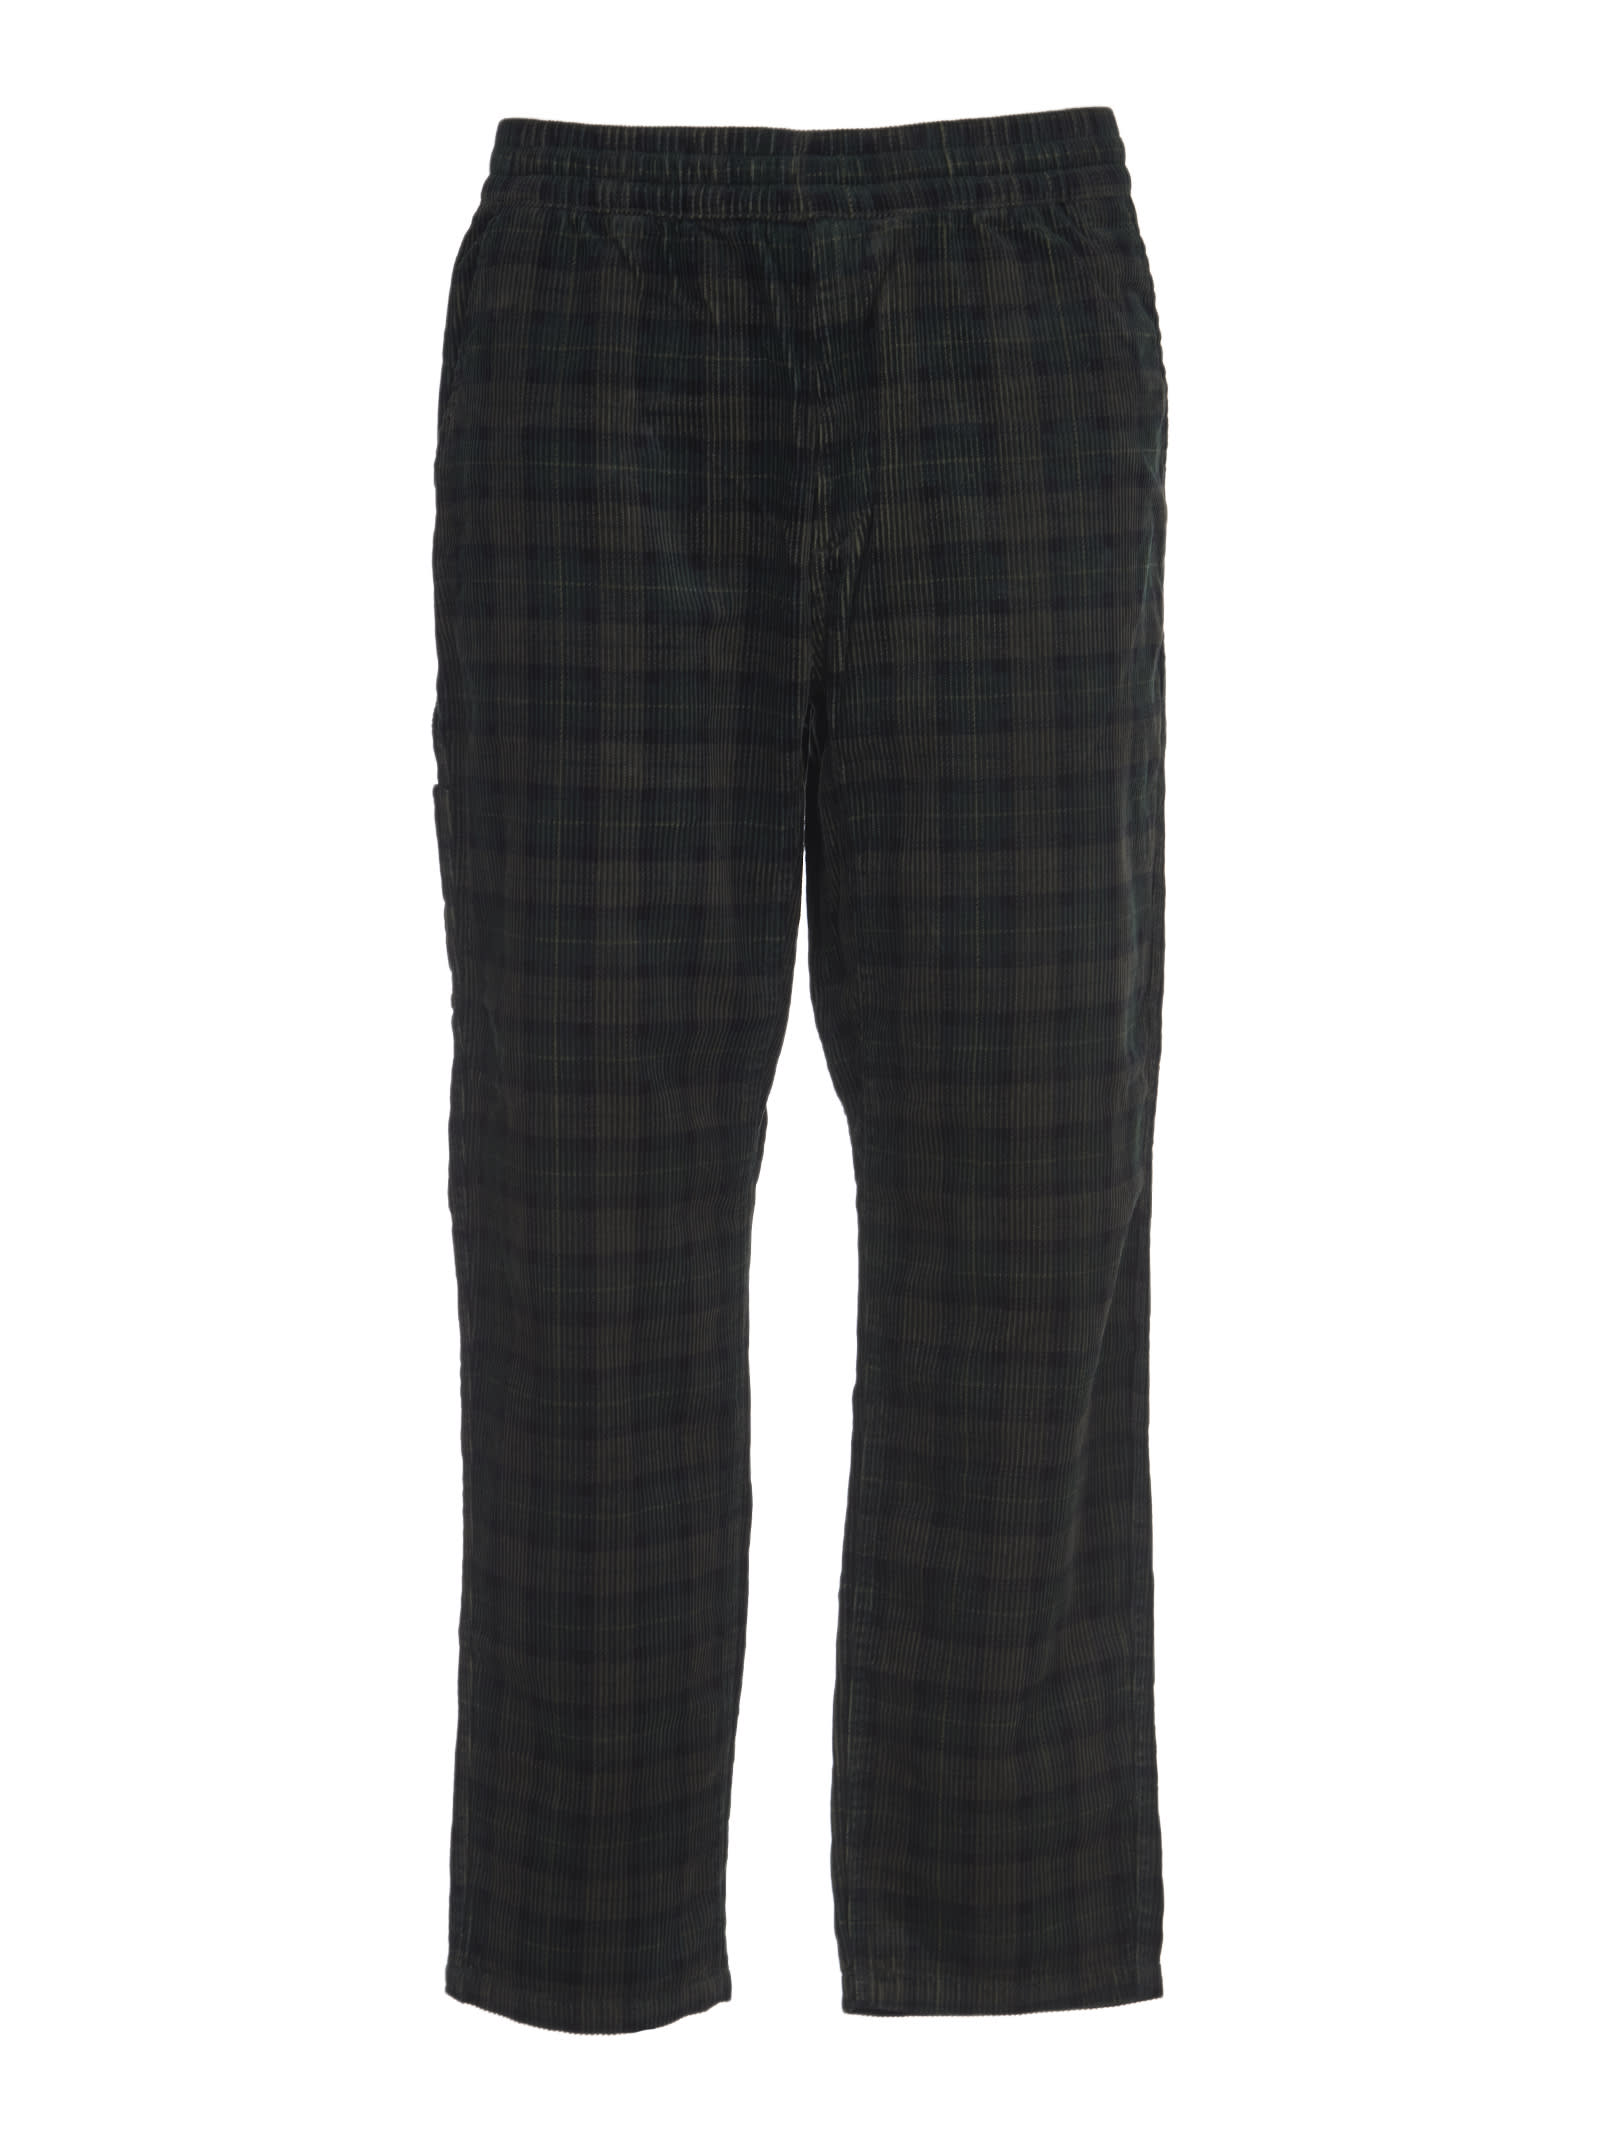 Carhartt Checked Corduroy Trousers